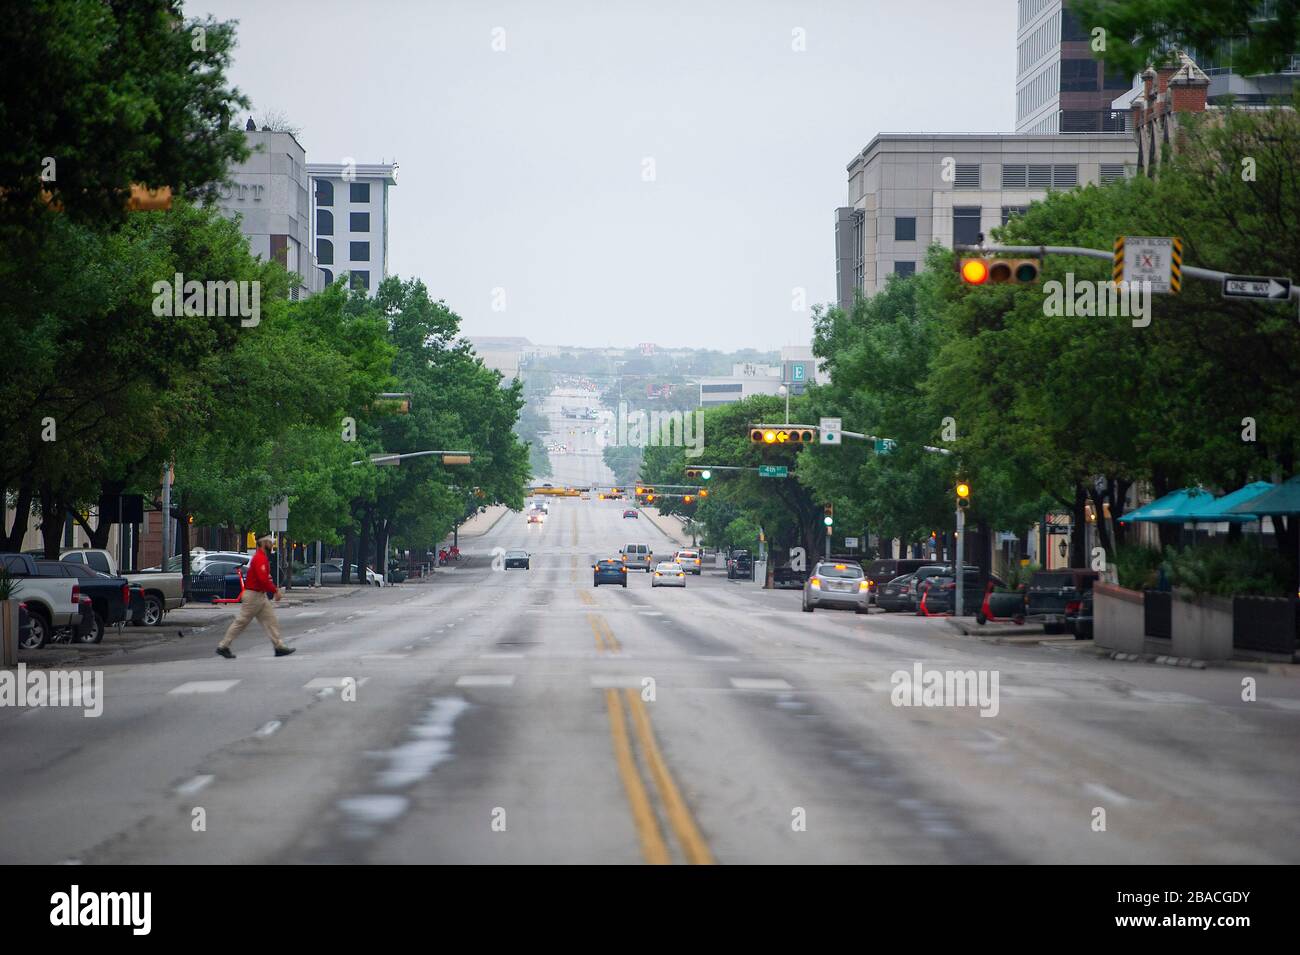 March 26, 2020: The world wide Pandemic Covid-19 has impacted daily traffic on Congress Ave that would have hundreds of vehicles heading into Downtown Austin, Texas. Mario Cantu/CSM Stock Photo